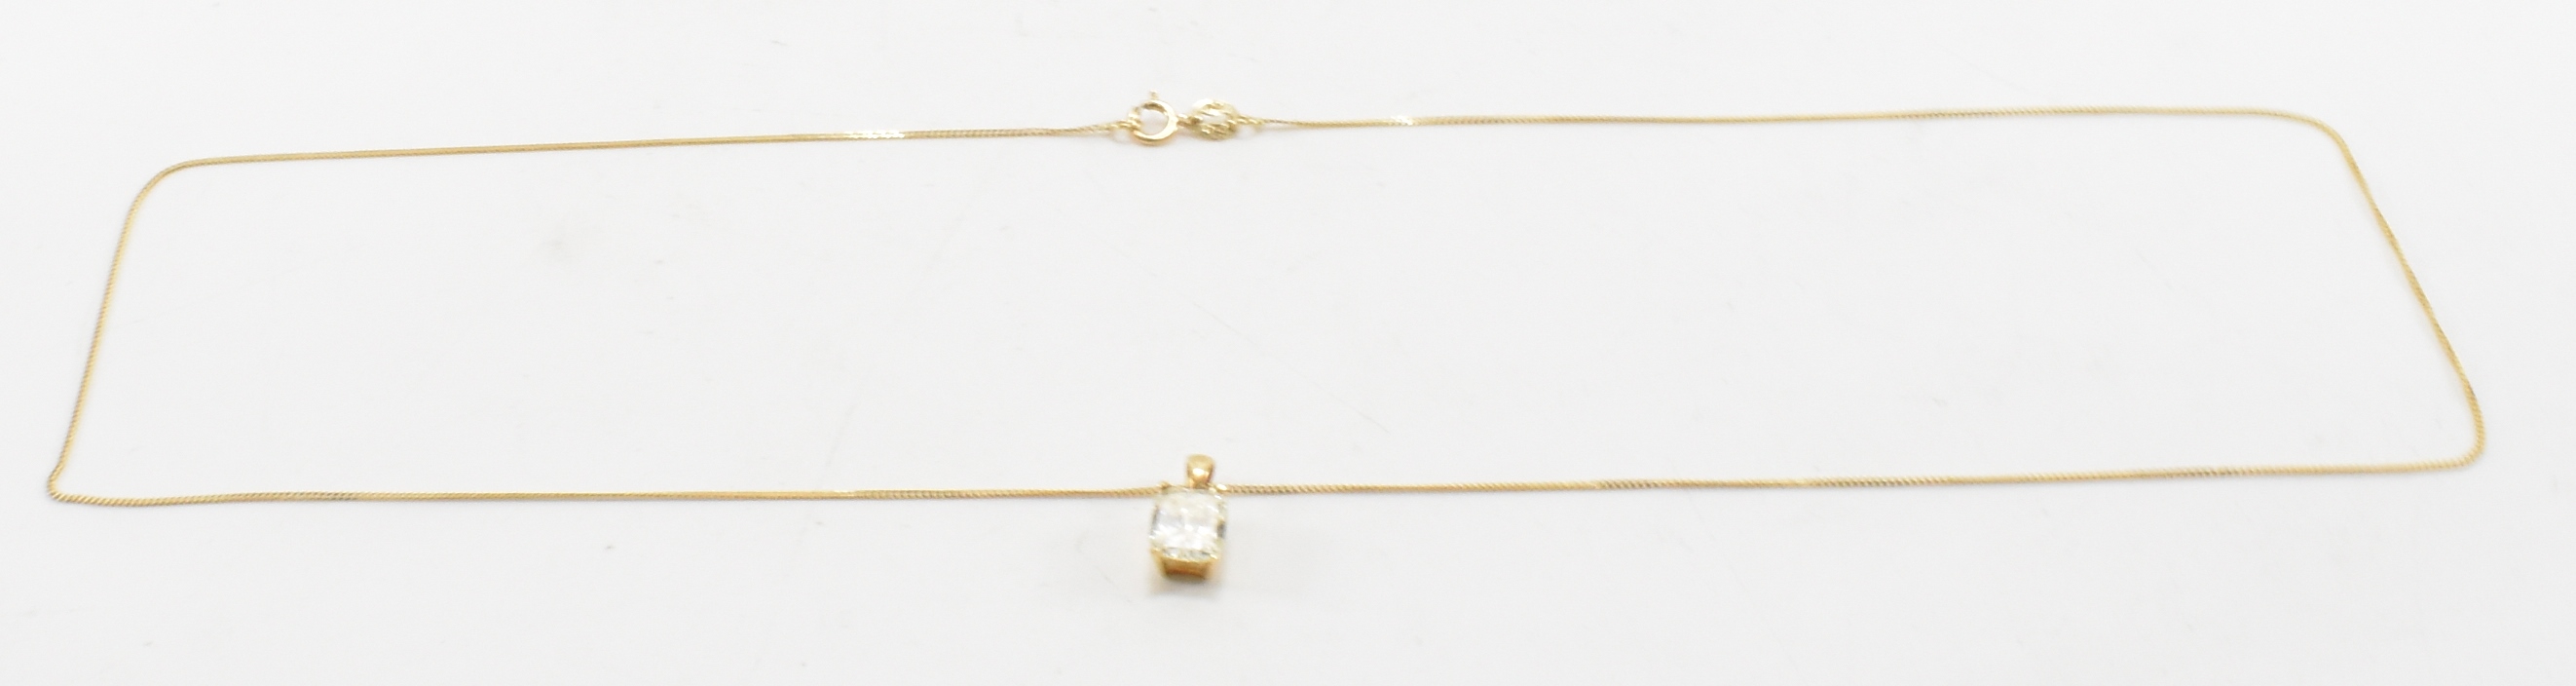 18CT GOLD & DIAMOND PENDANT NECKLACE & GOLD CHAIN - Image 8 of 8